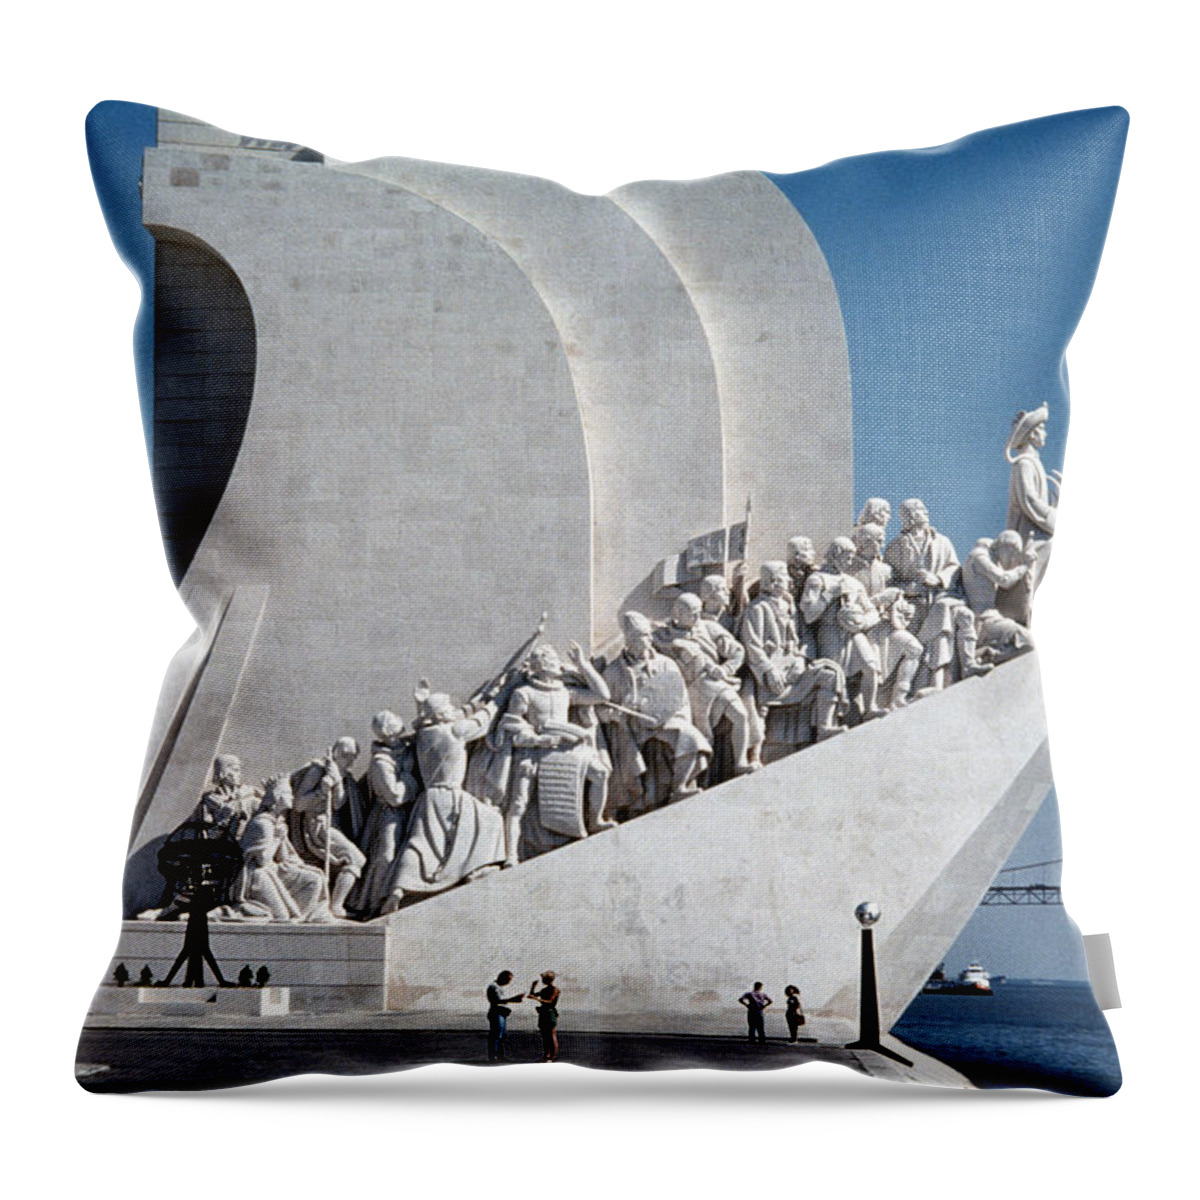 1960 Throw Pillow featuring the photograph Lisbon, Portugal by Granger